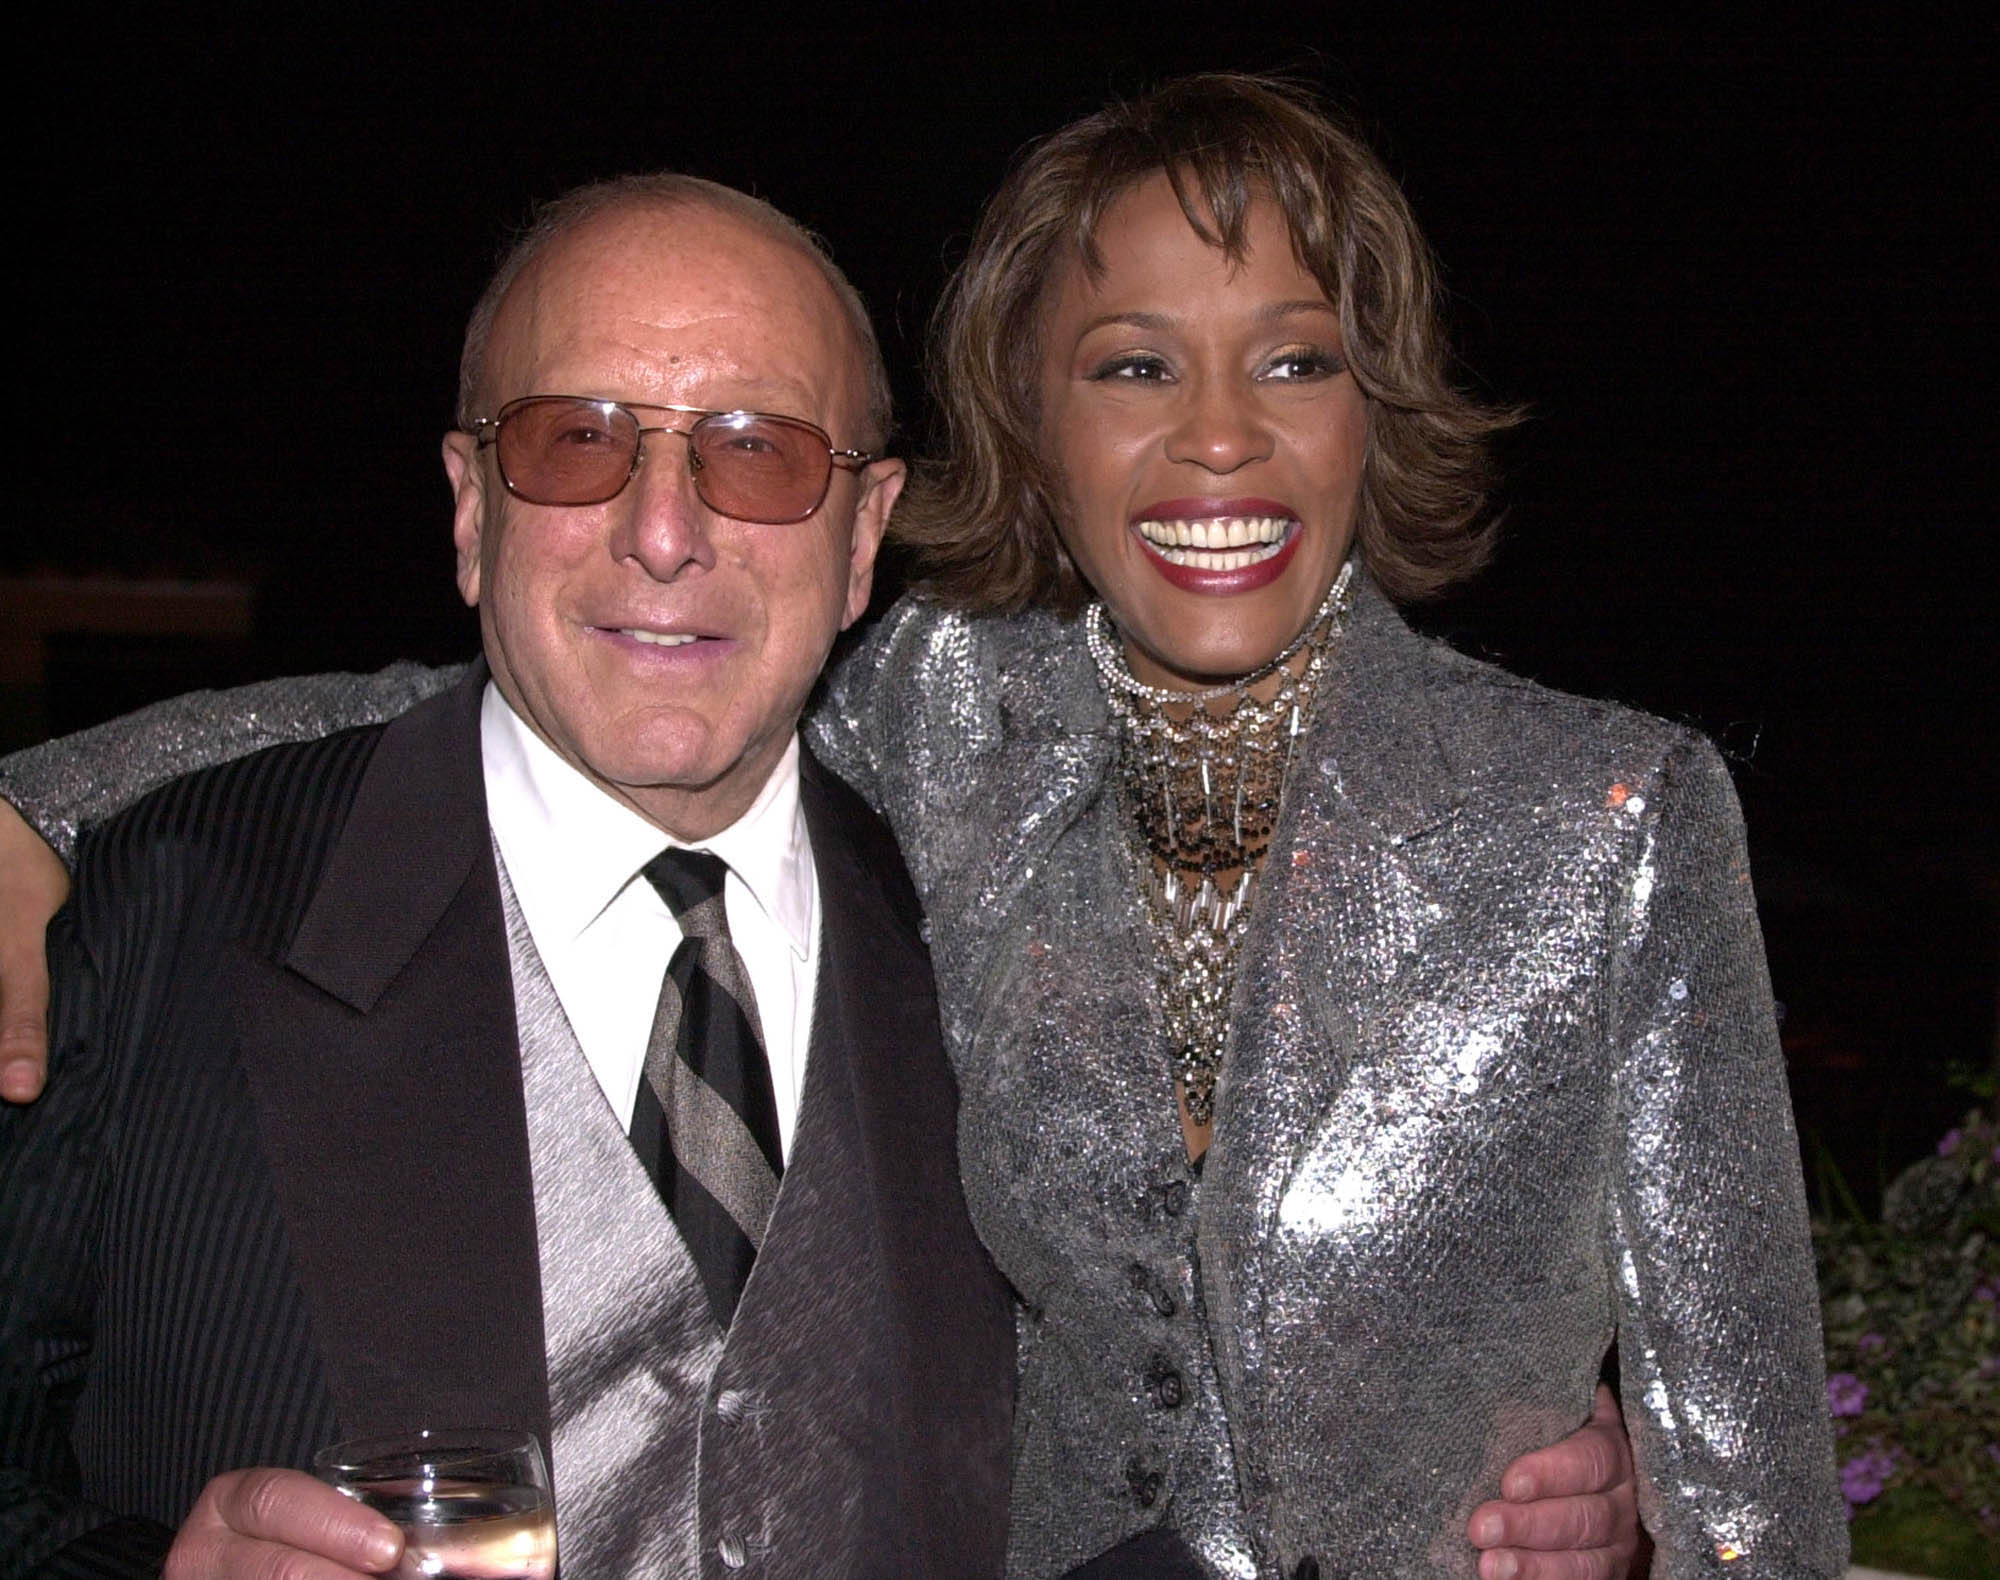 Clive Davis claims Whitney Houston tried to quit drugs before her death